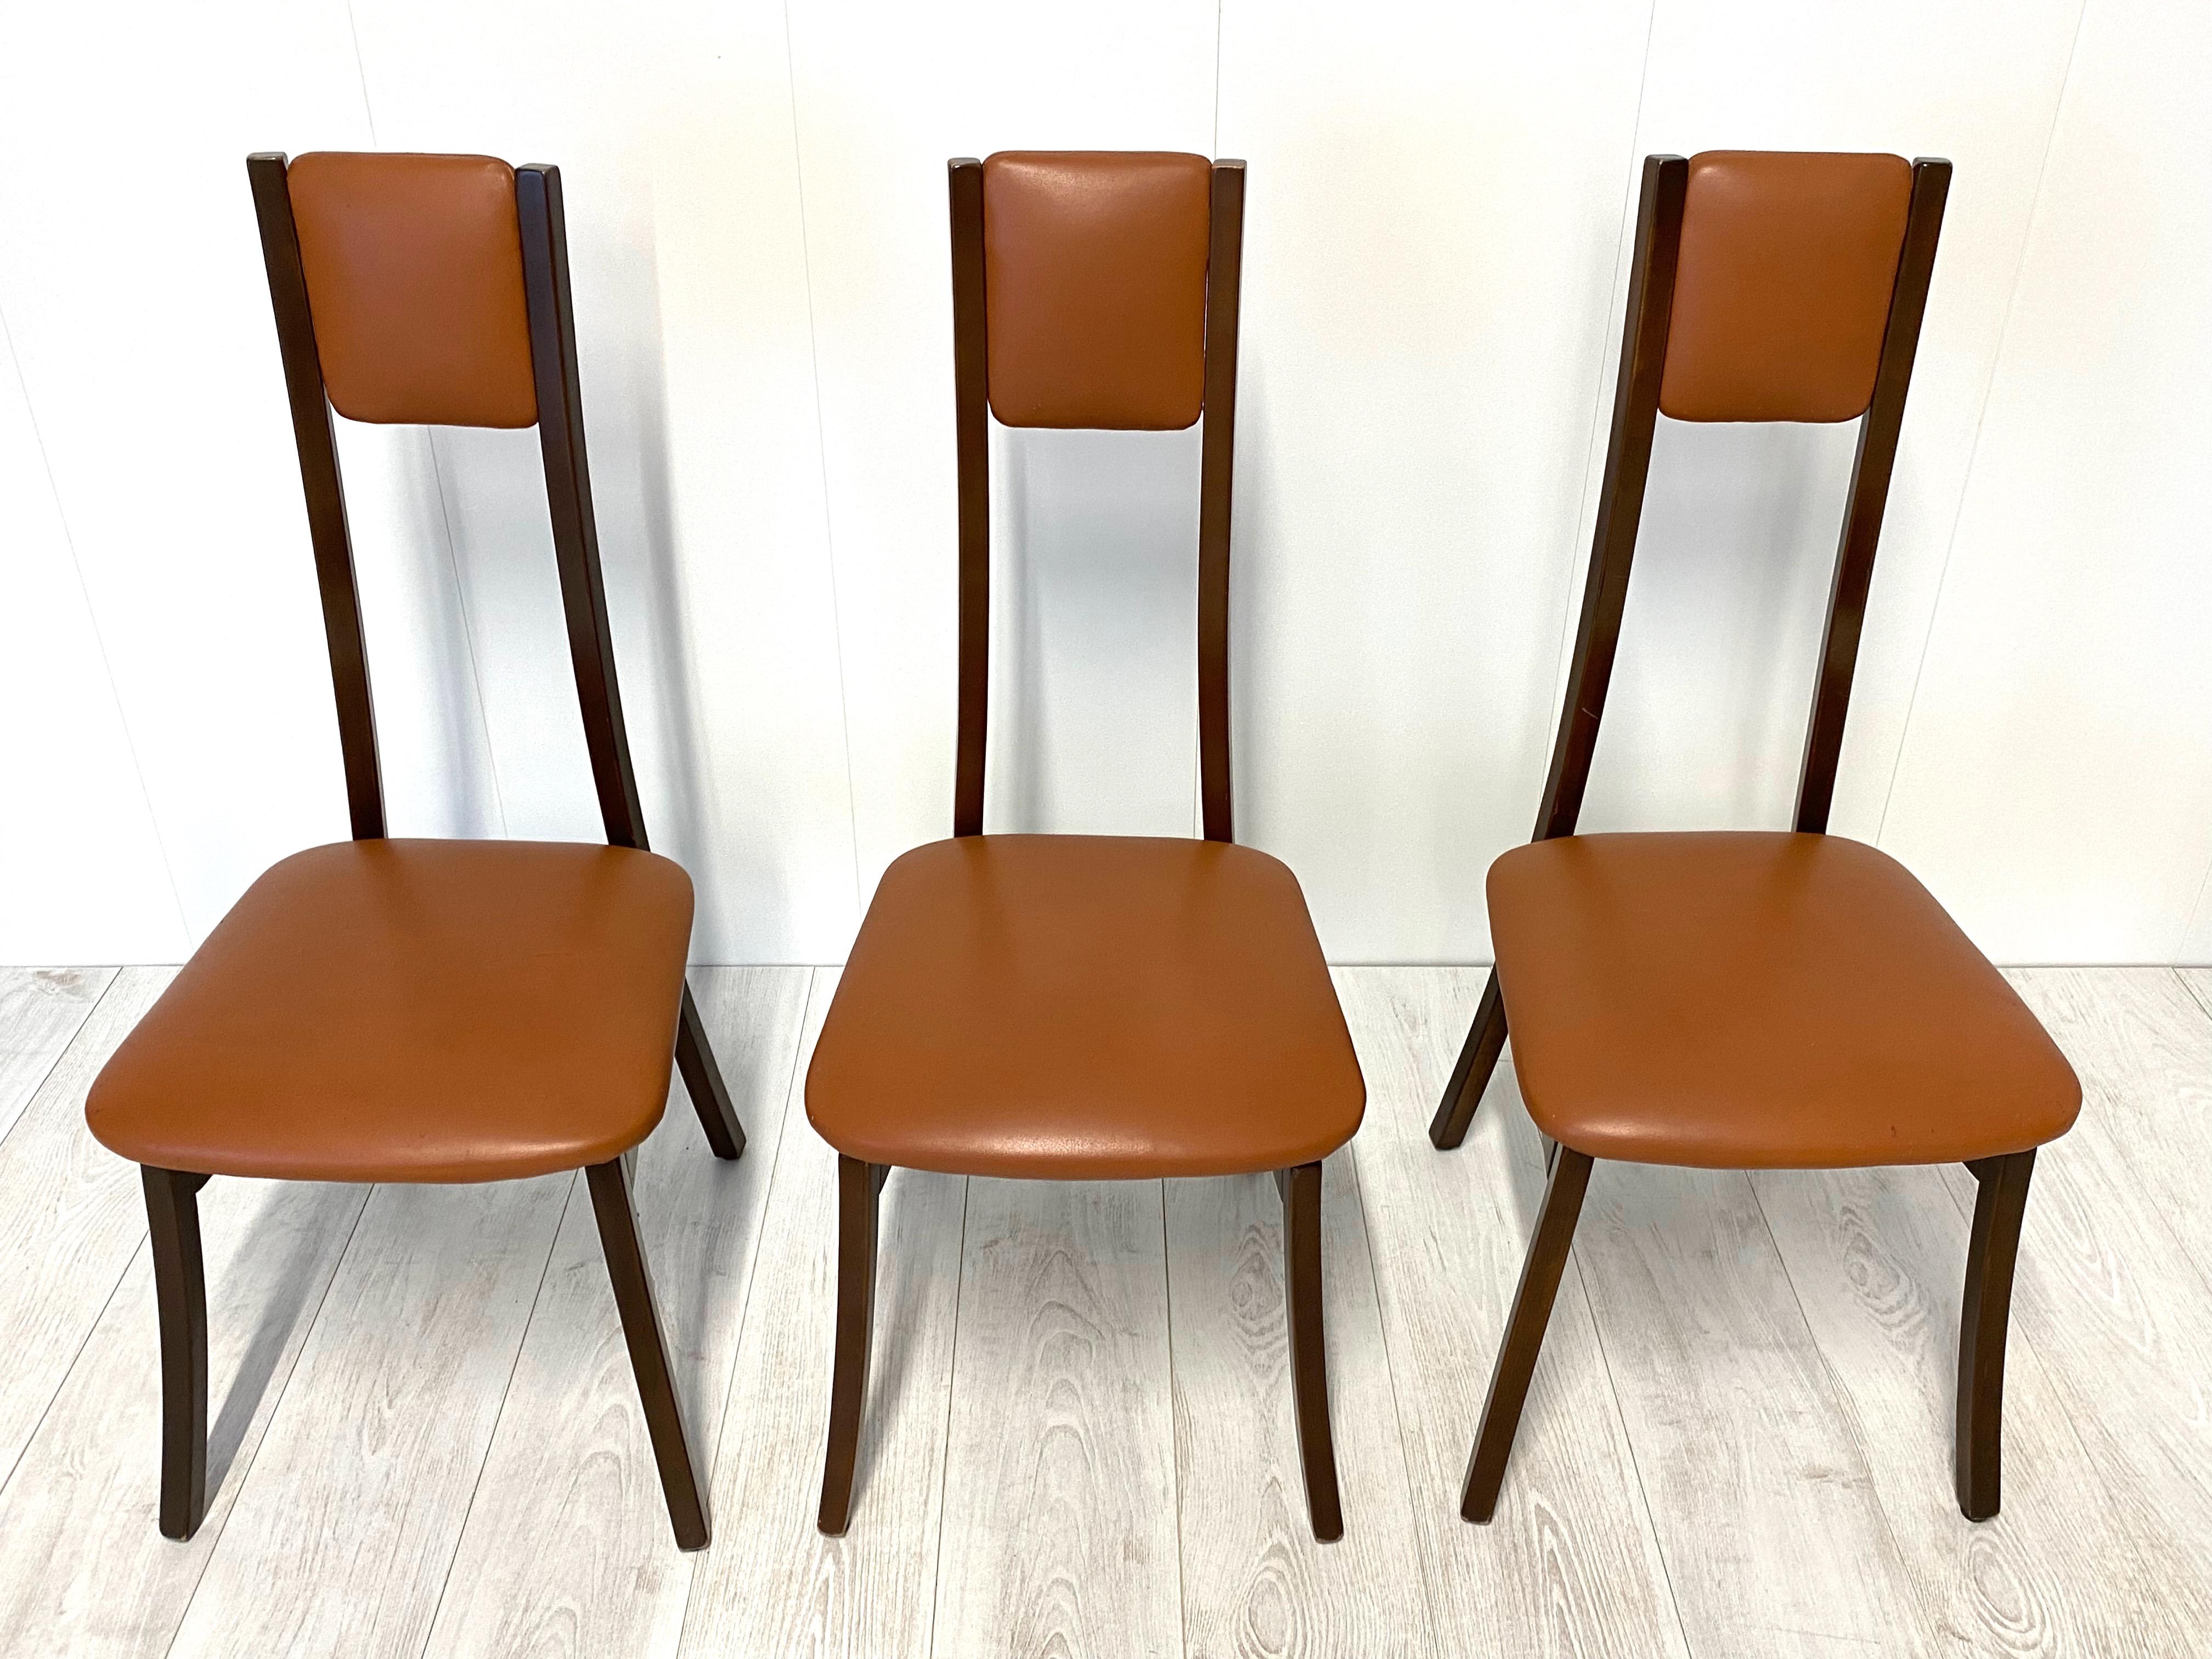 Model Programma S11 Dining Chairs by Angelo Mangiarotti, Set of 6 In Good Condition For Sale In Rivoli, IT